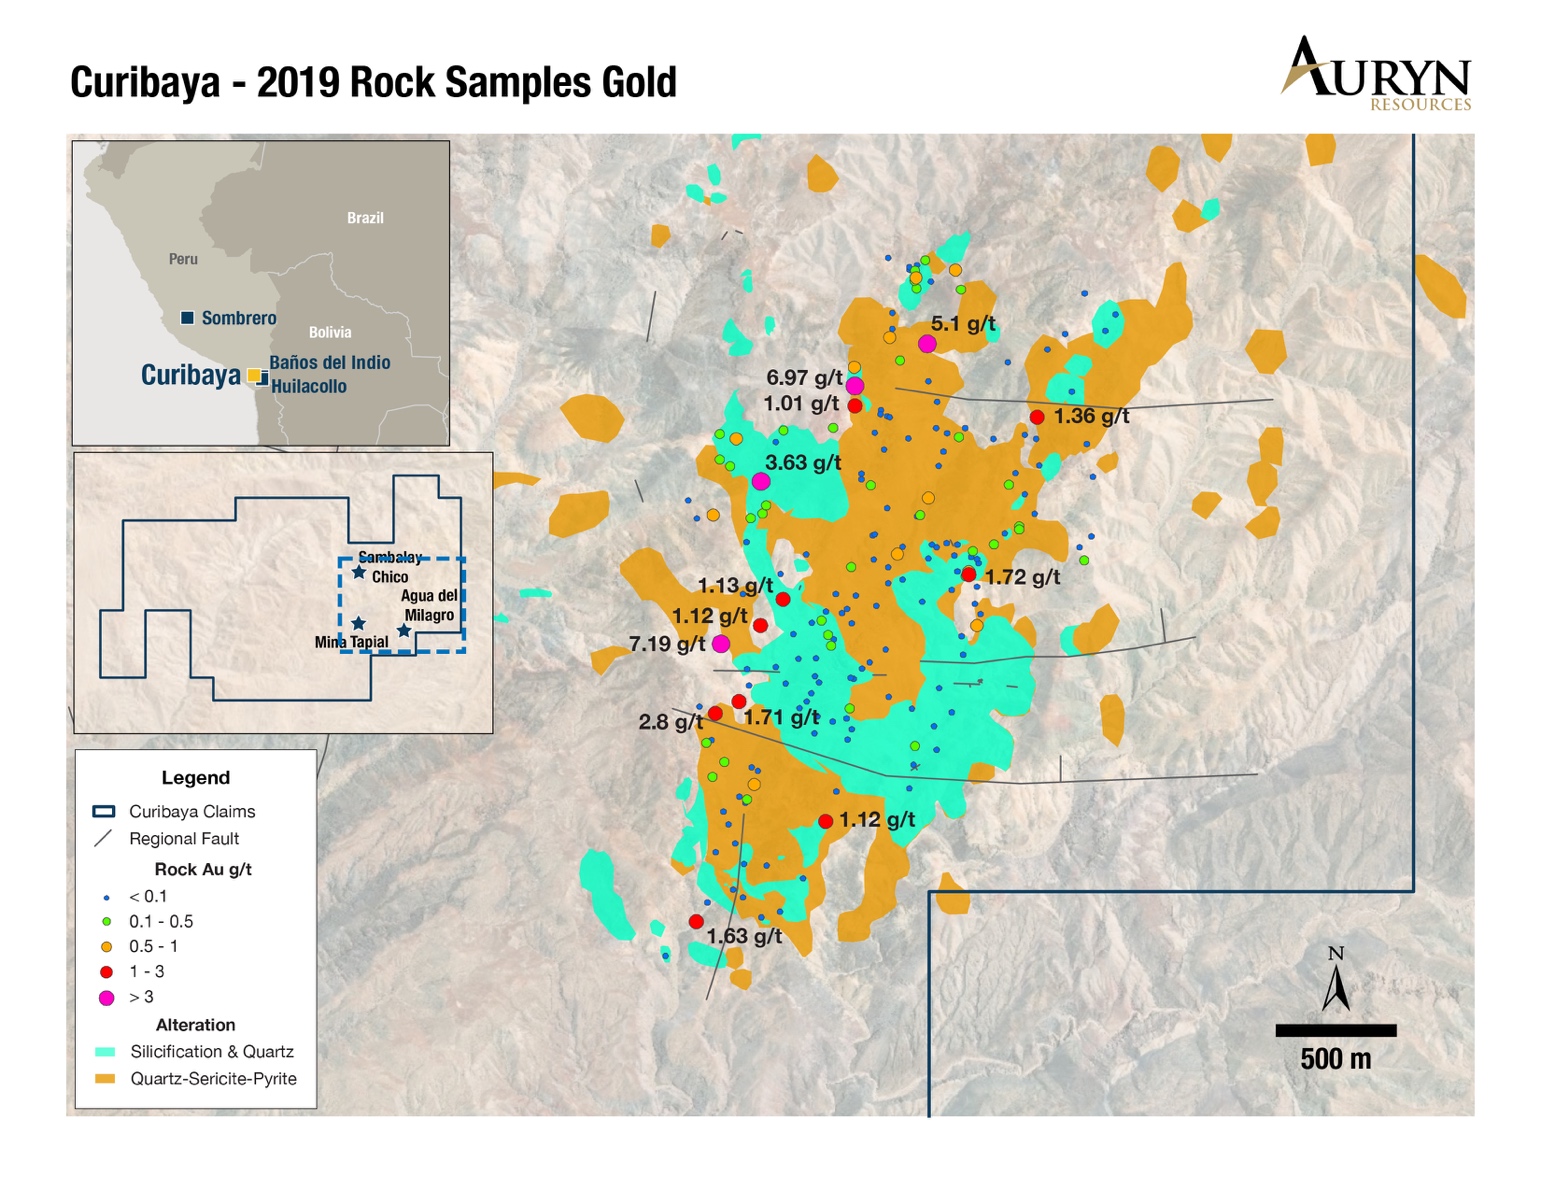 Auryn Resources Inc., Monday, October 28, 2019, Press release picture